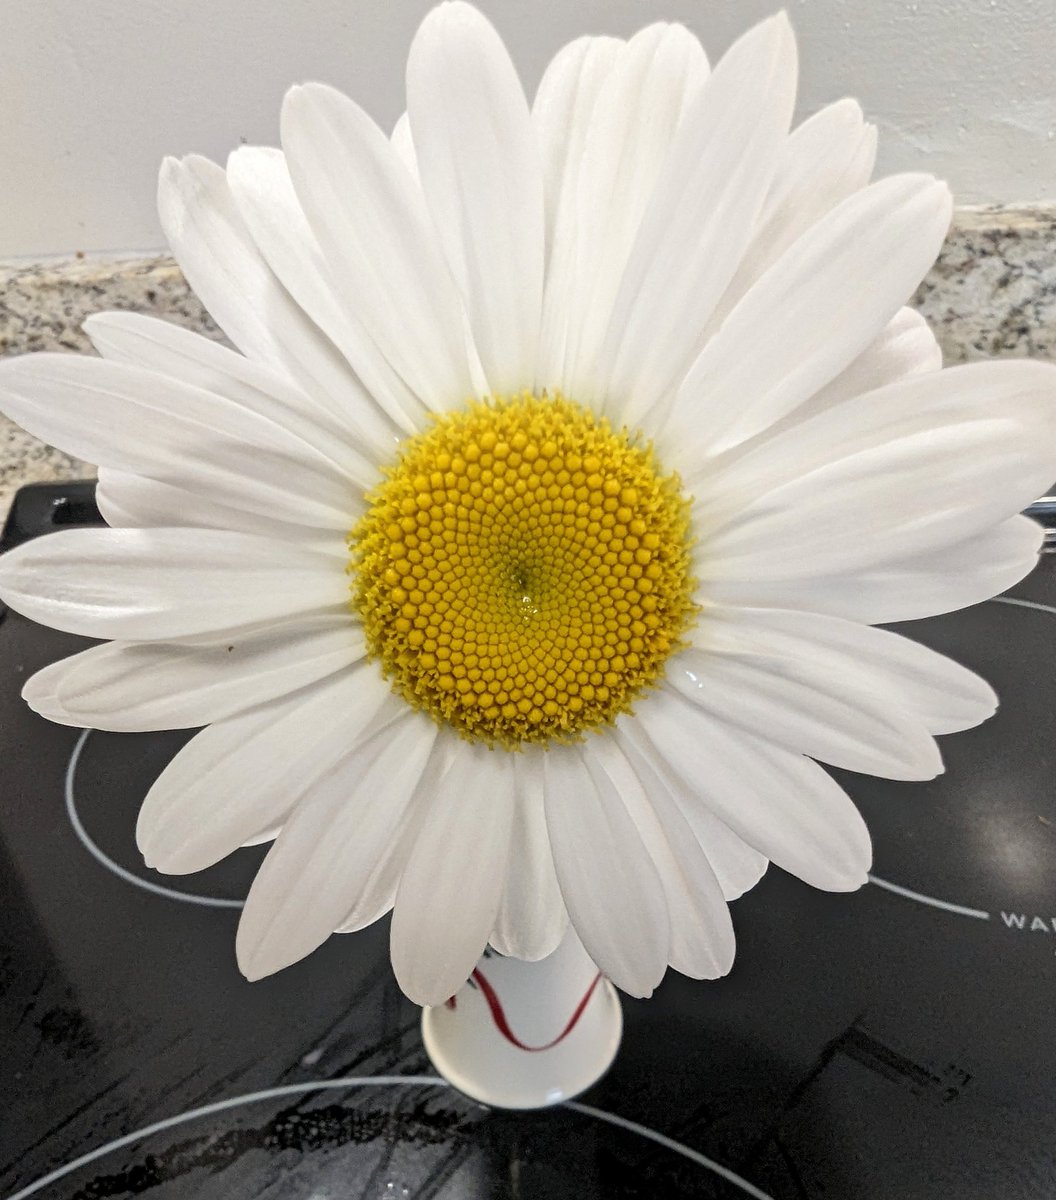 It is early in the year for a daisy to bloom but this plant does not seem to care...